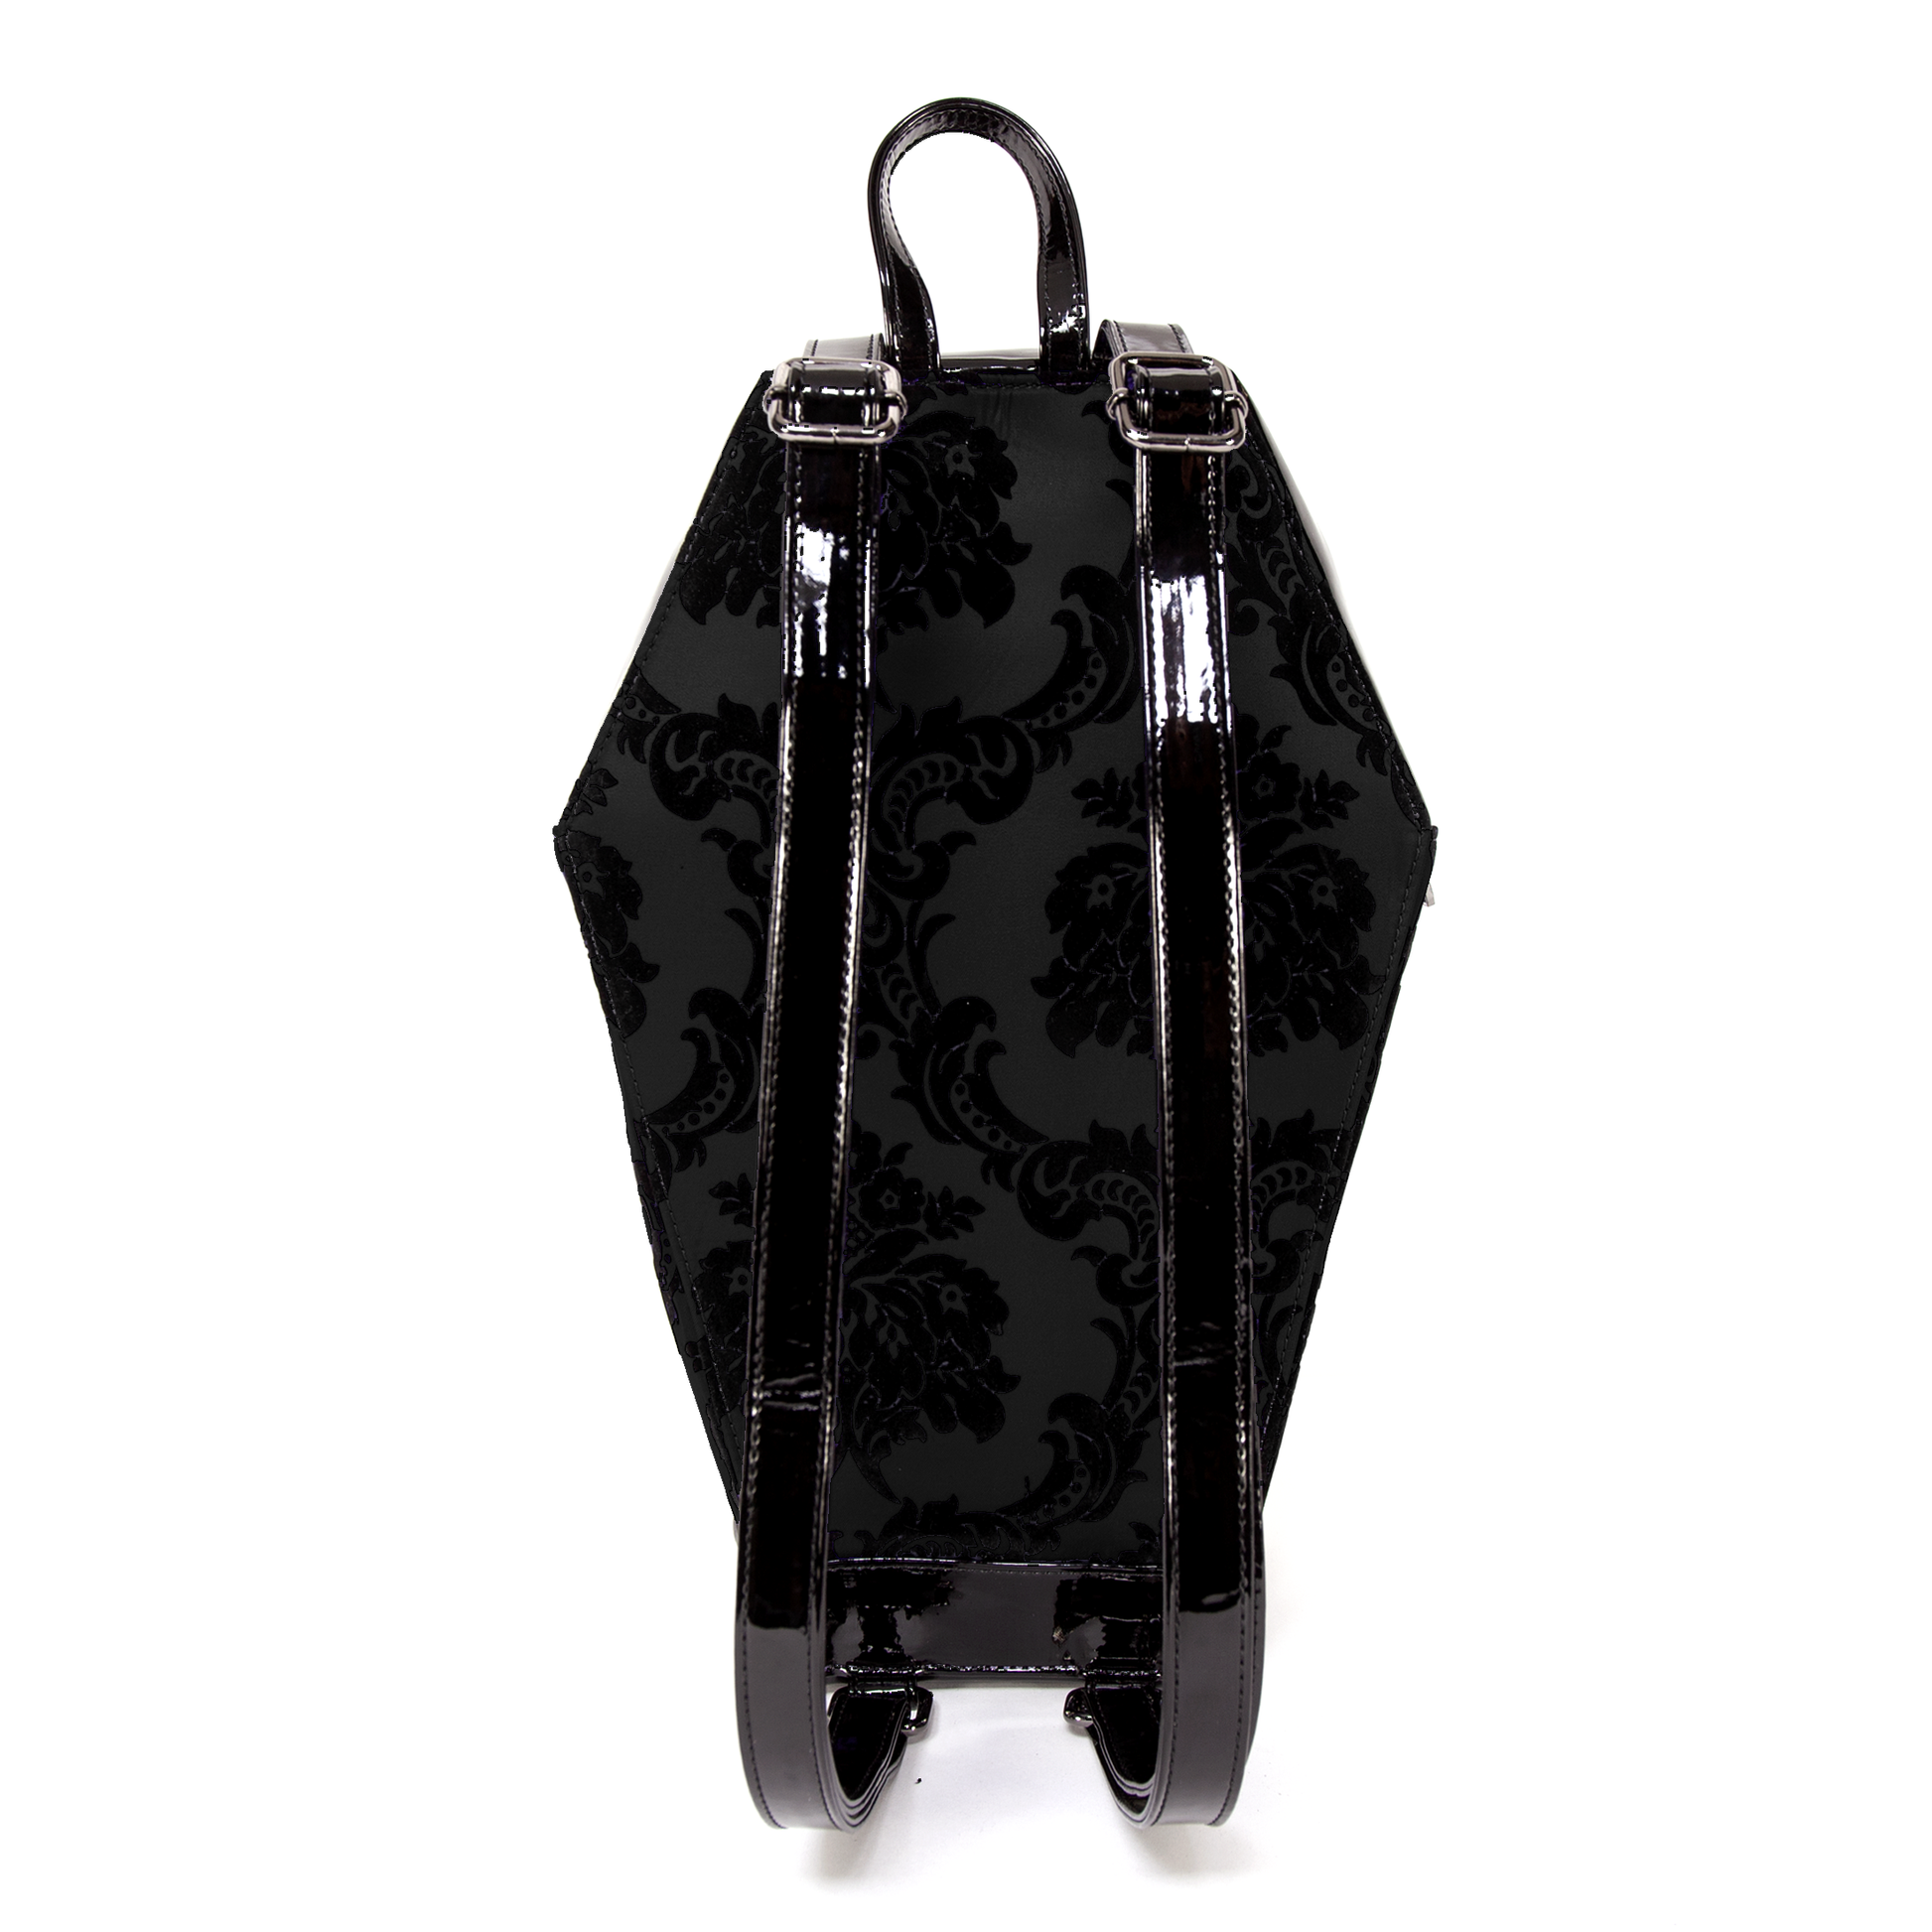 Gothic Coffin Shaped Backpack. punk rock, alternative & horror inspired purse